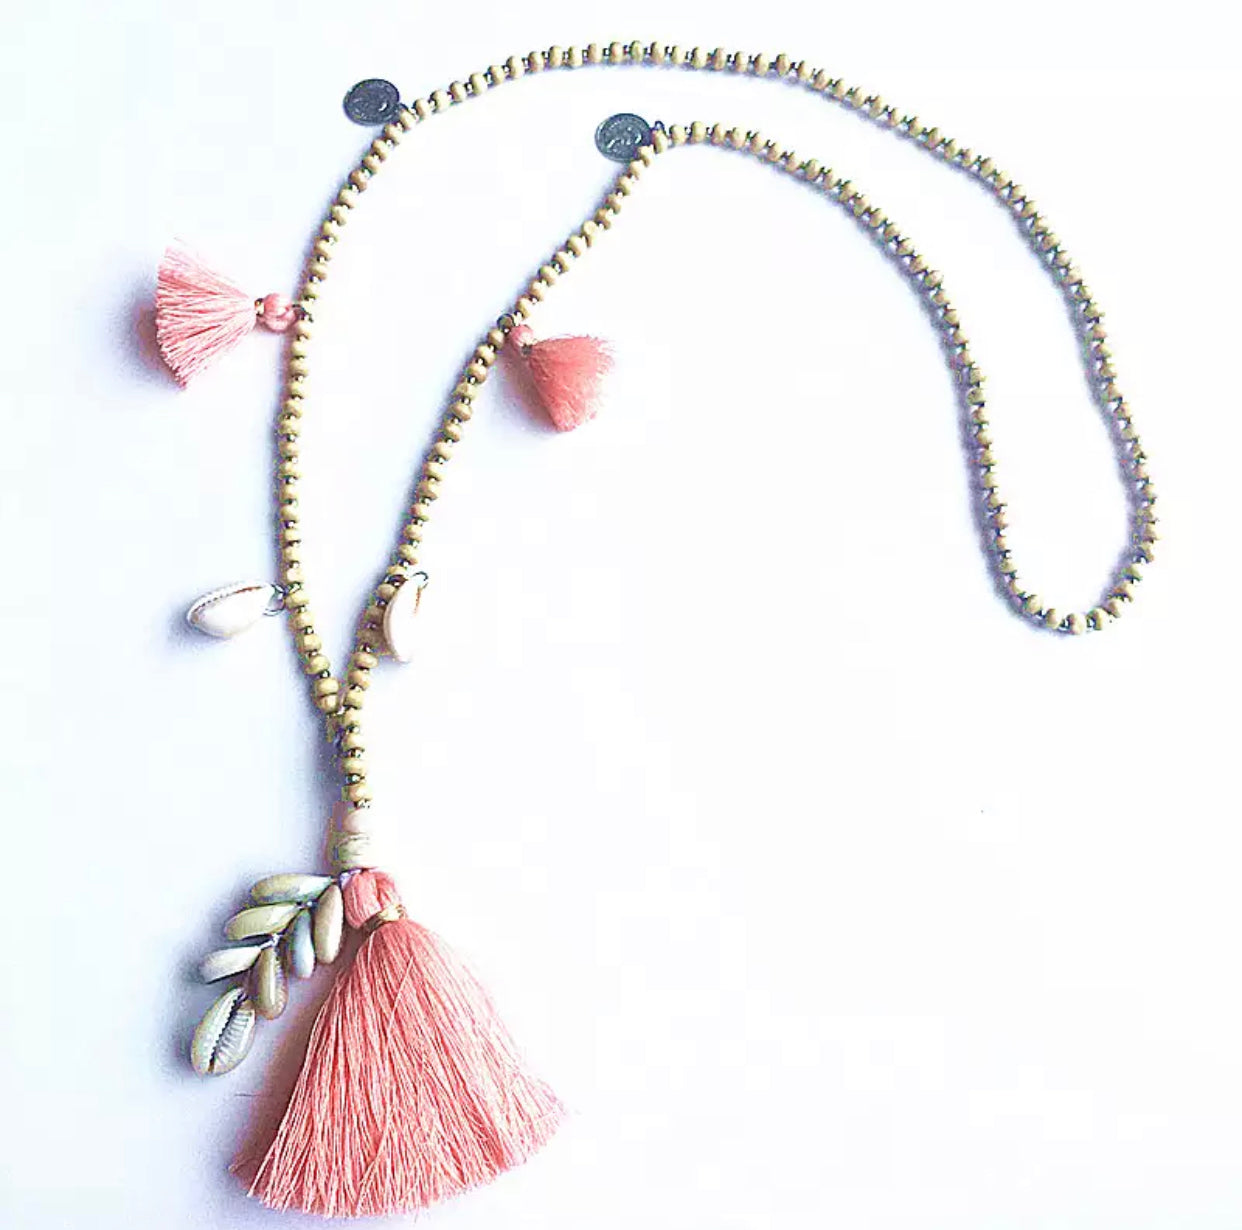 Wooden Beads Necklace with Cowry Shells and  Peach Cotton Tassels